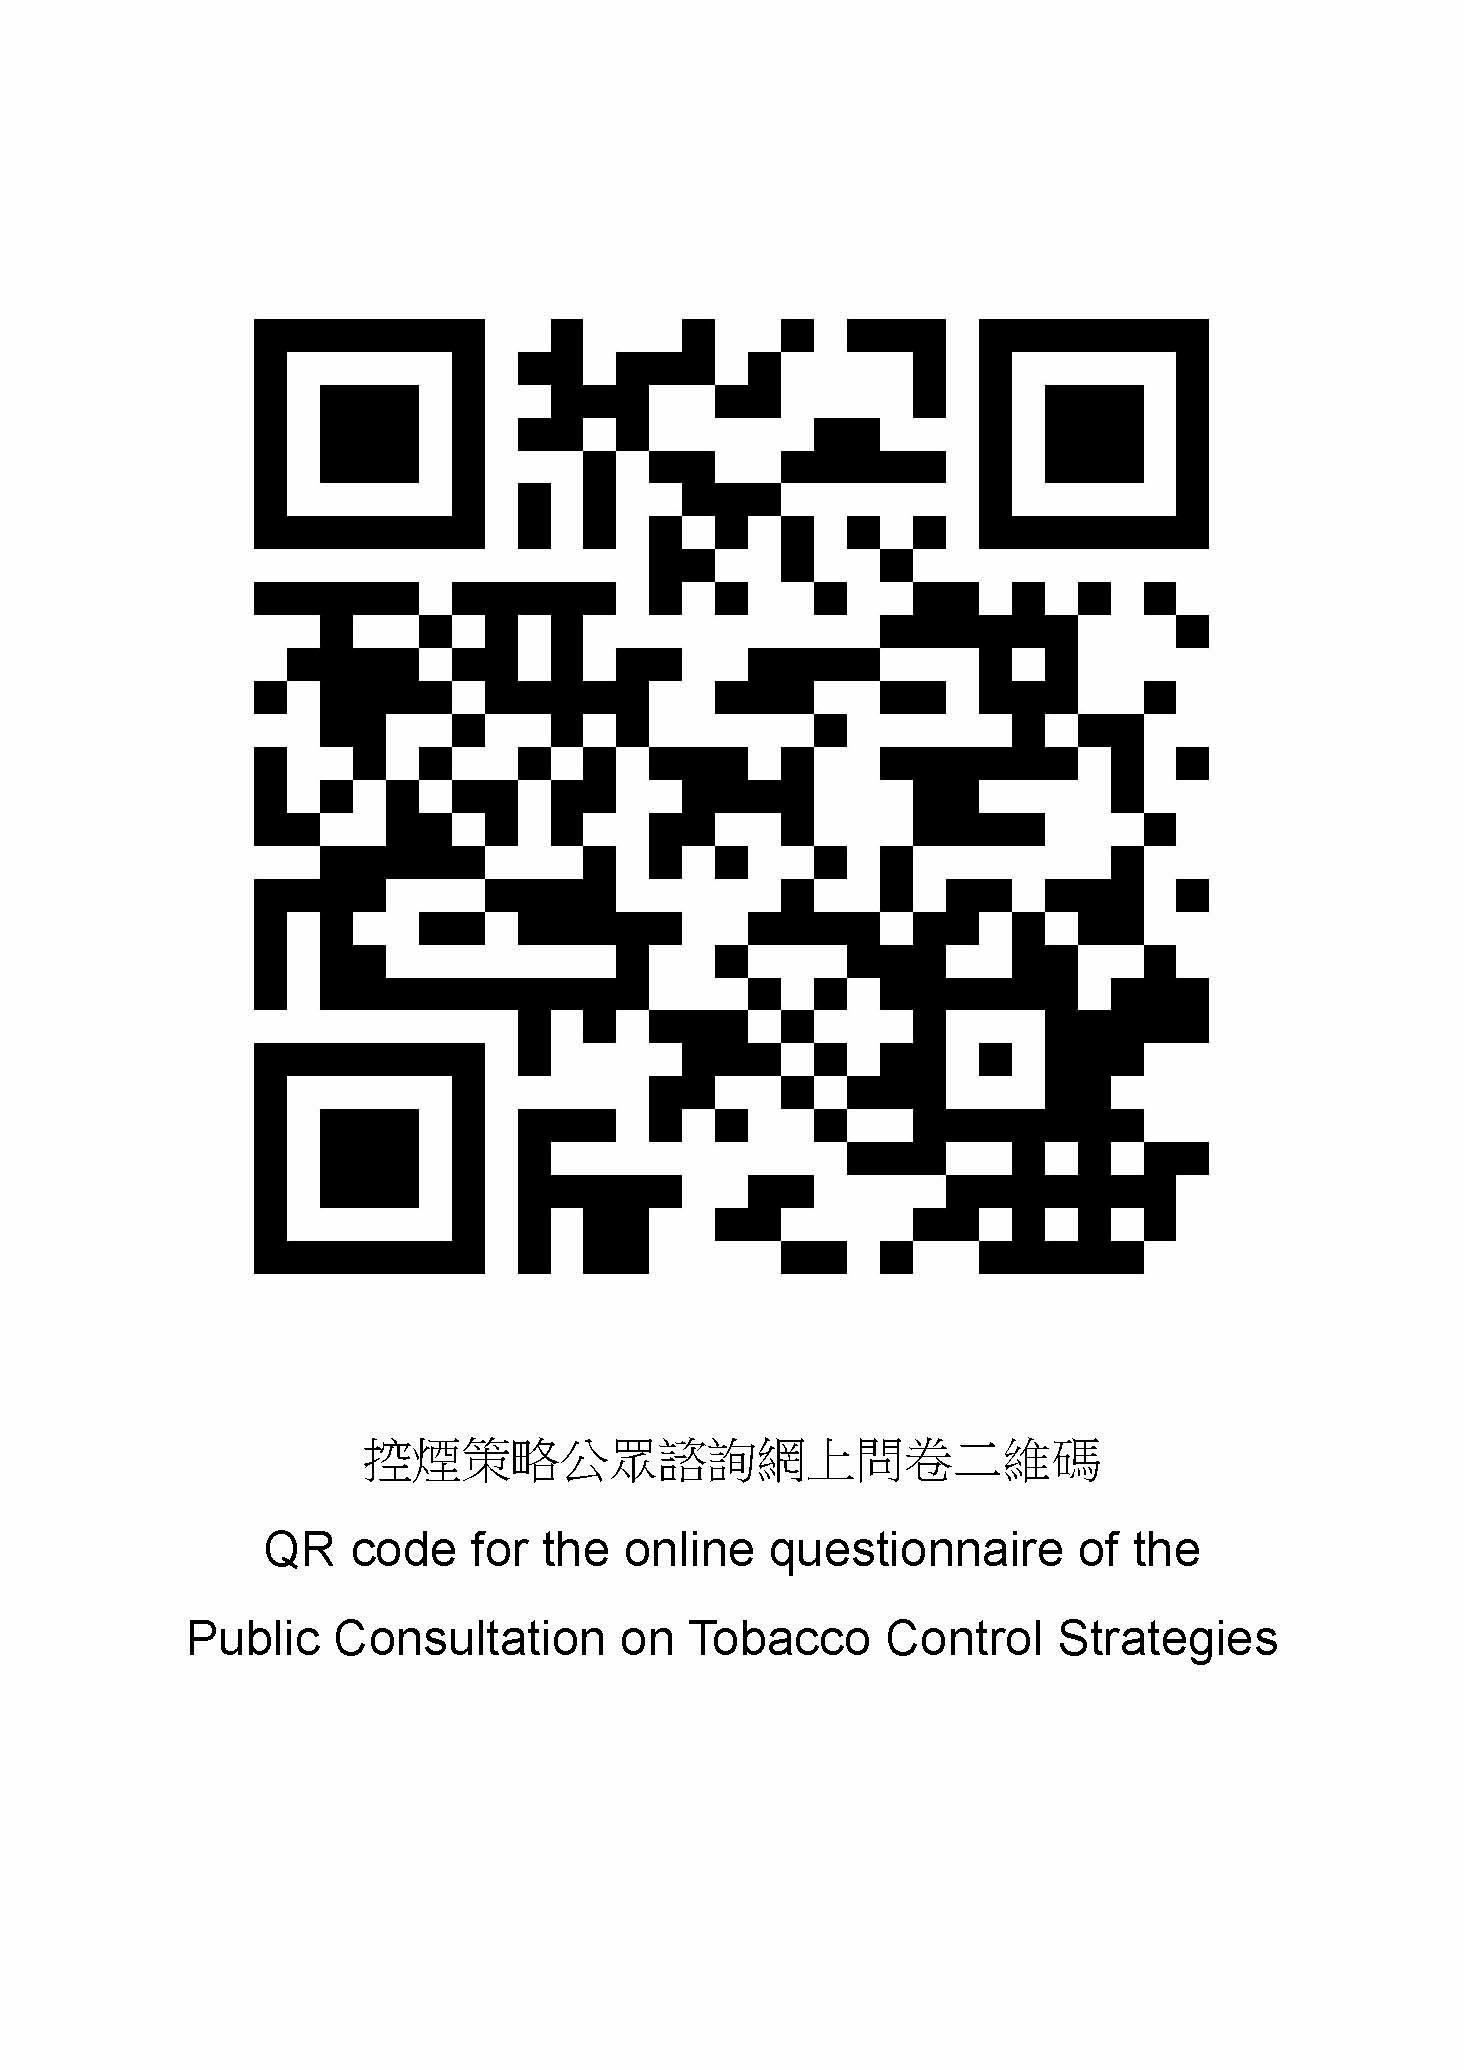 The Health Bureau today (July 12) launched the Vibrant, Healthy and Tobacco-free Hong Kong public consultation on tobacco control strategies. Members of the public may express their views on the tobacco control work for the next phase by scanning this QR code.